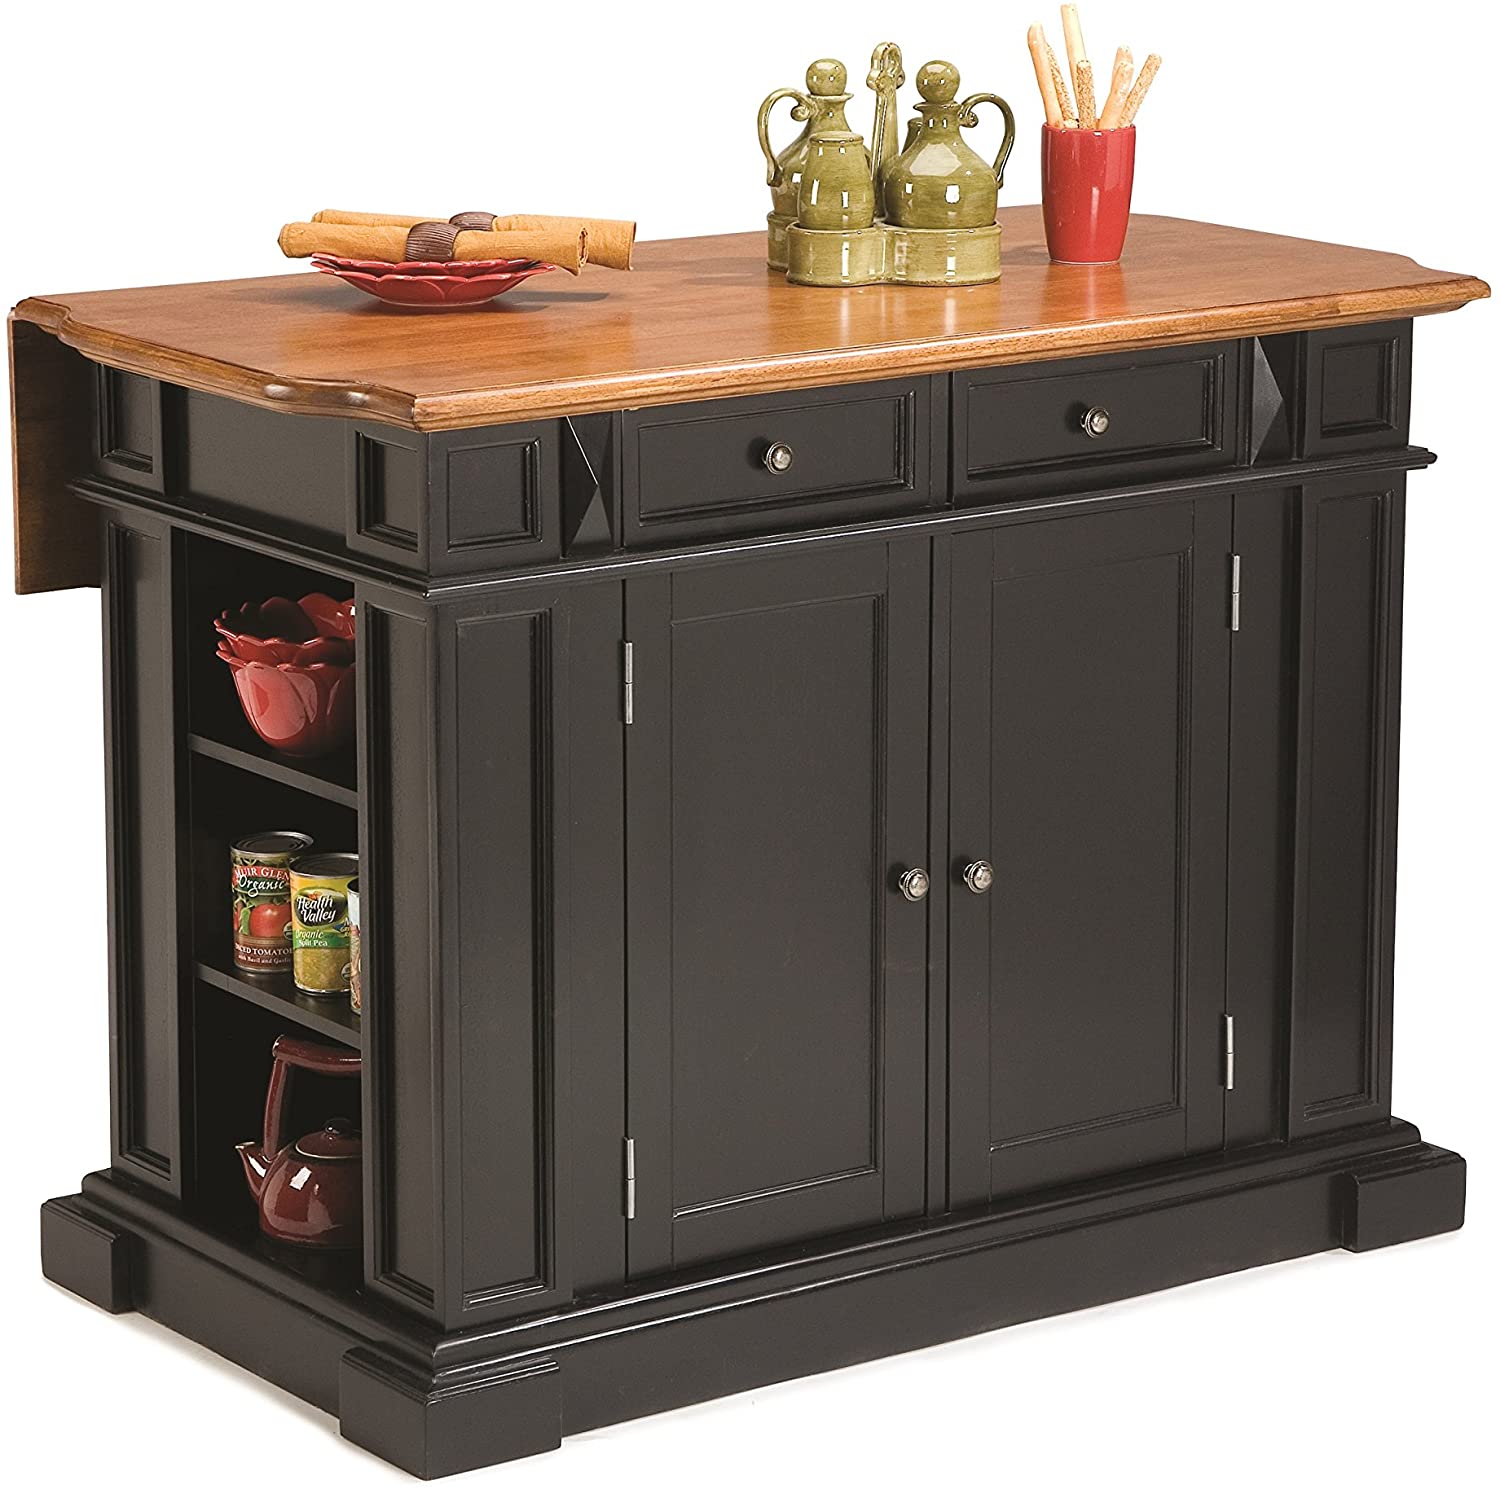 Americana Black and Distressed Oak Kitchen Island by Home Styles